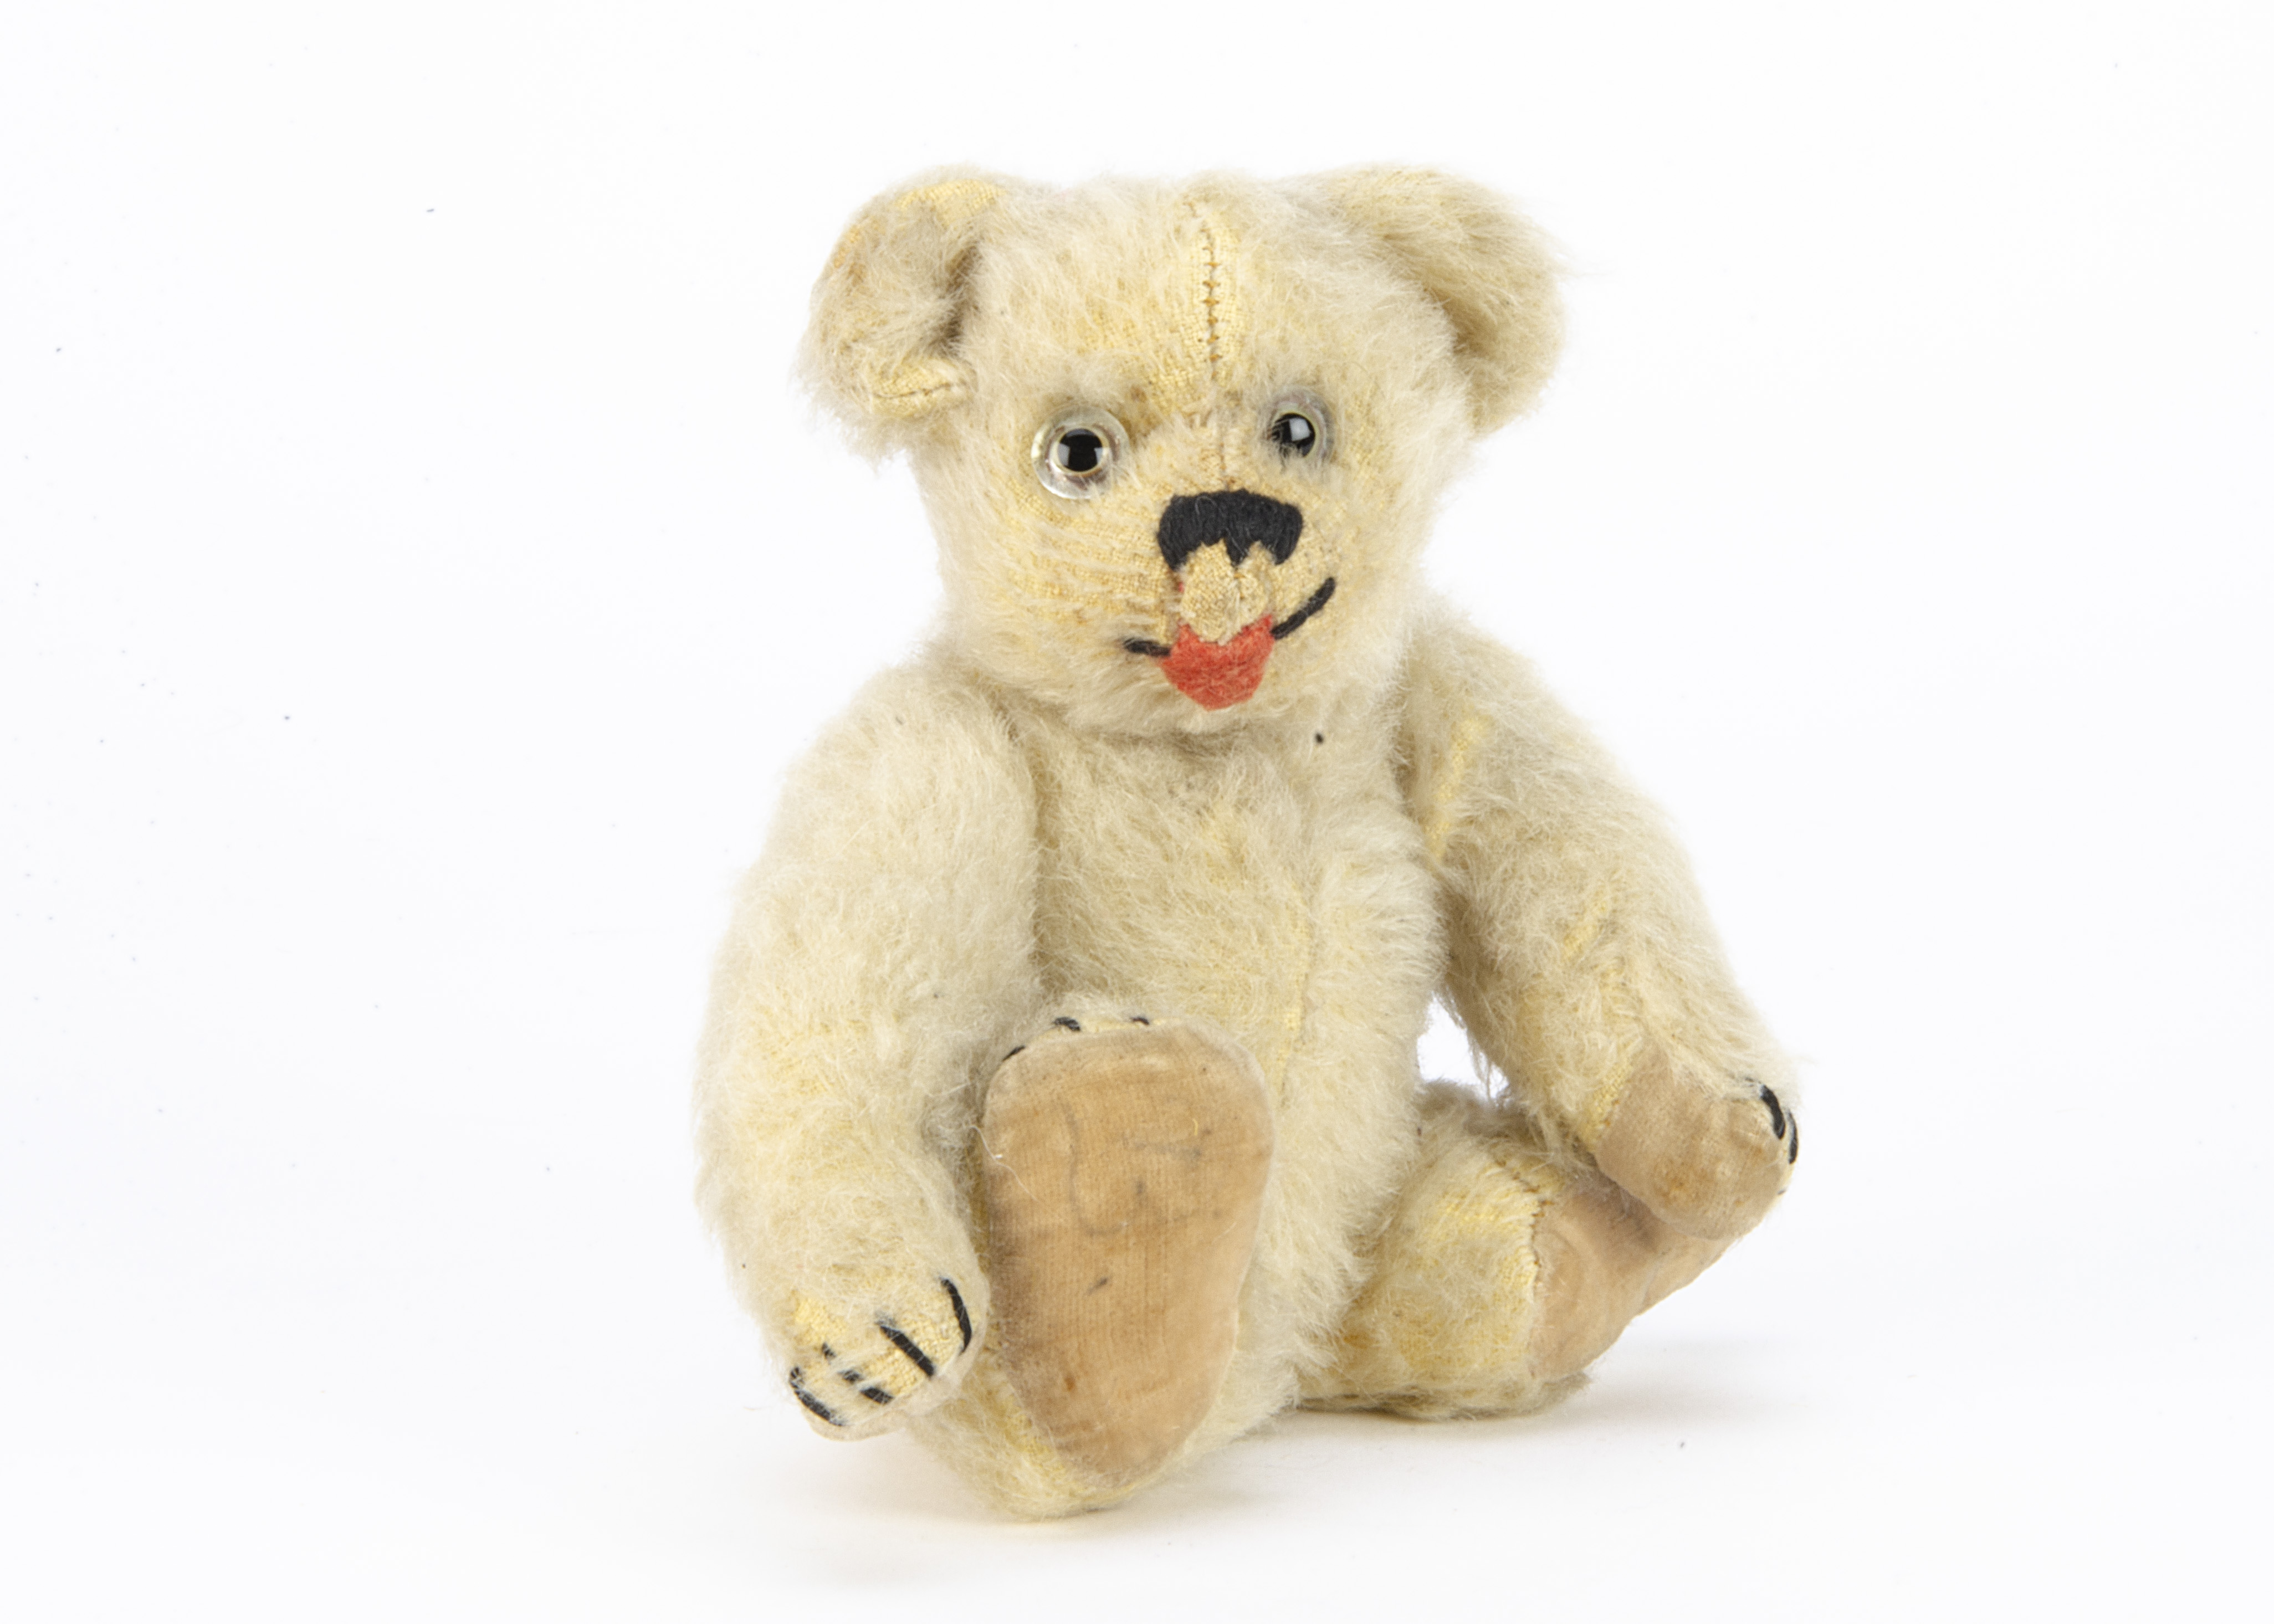 Bear Cub a rare Moritz Pappe teddy bear cub 1930s, with cream wool plush, clear and black glass eyes - Image 2 of 2